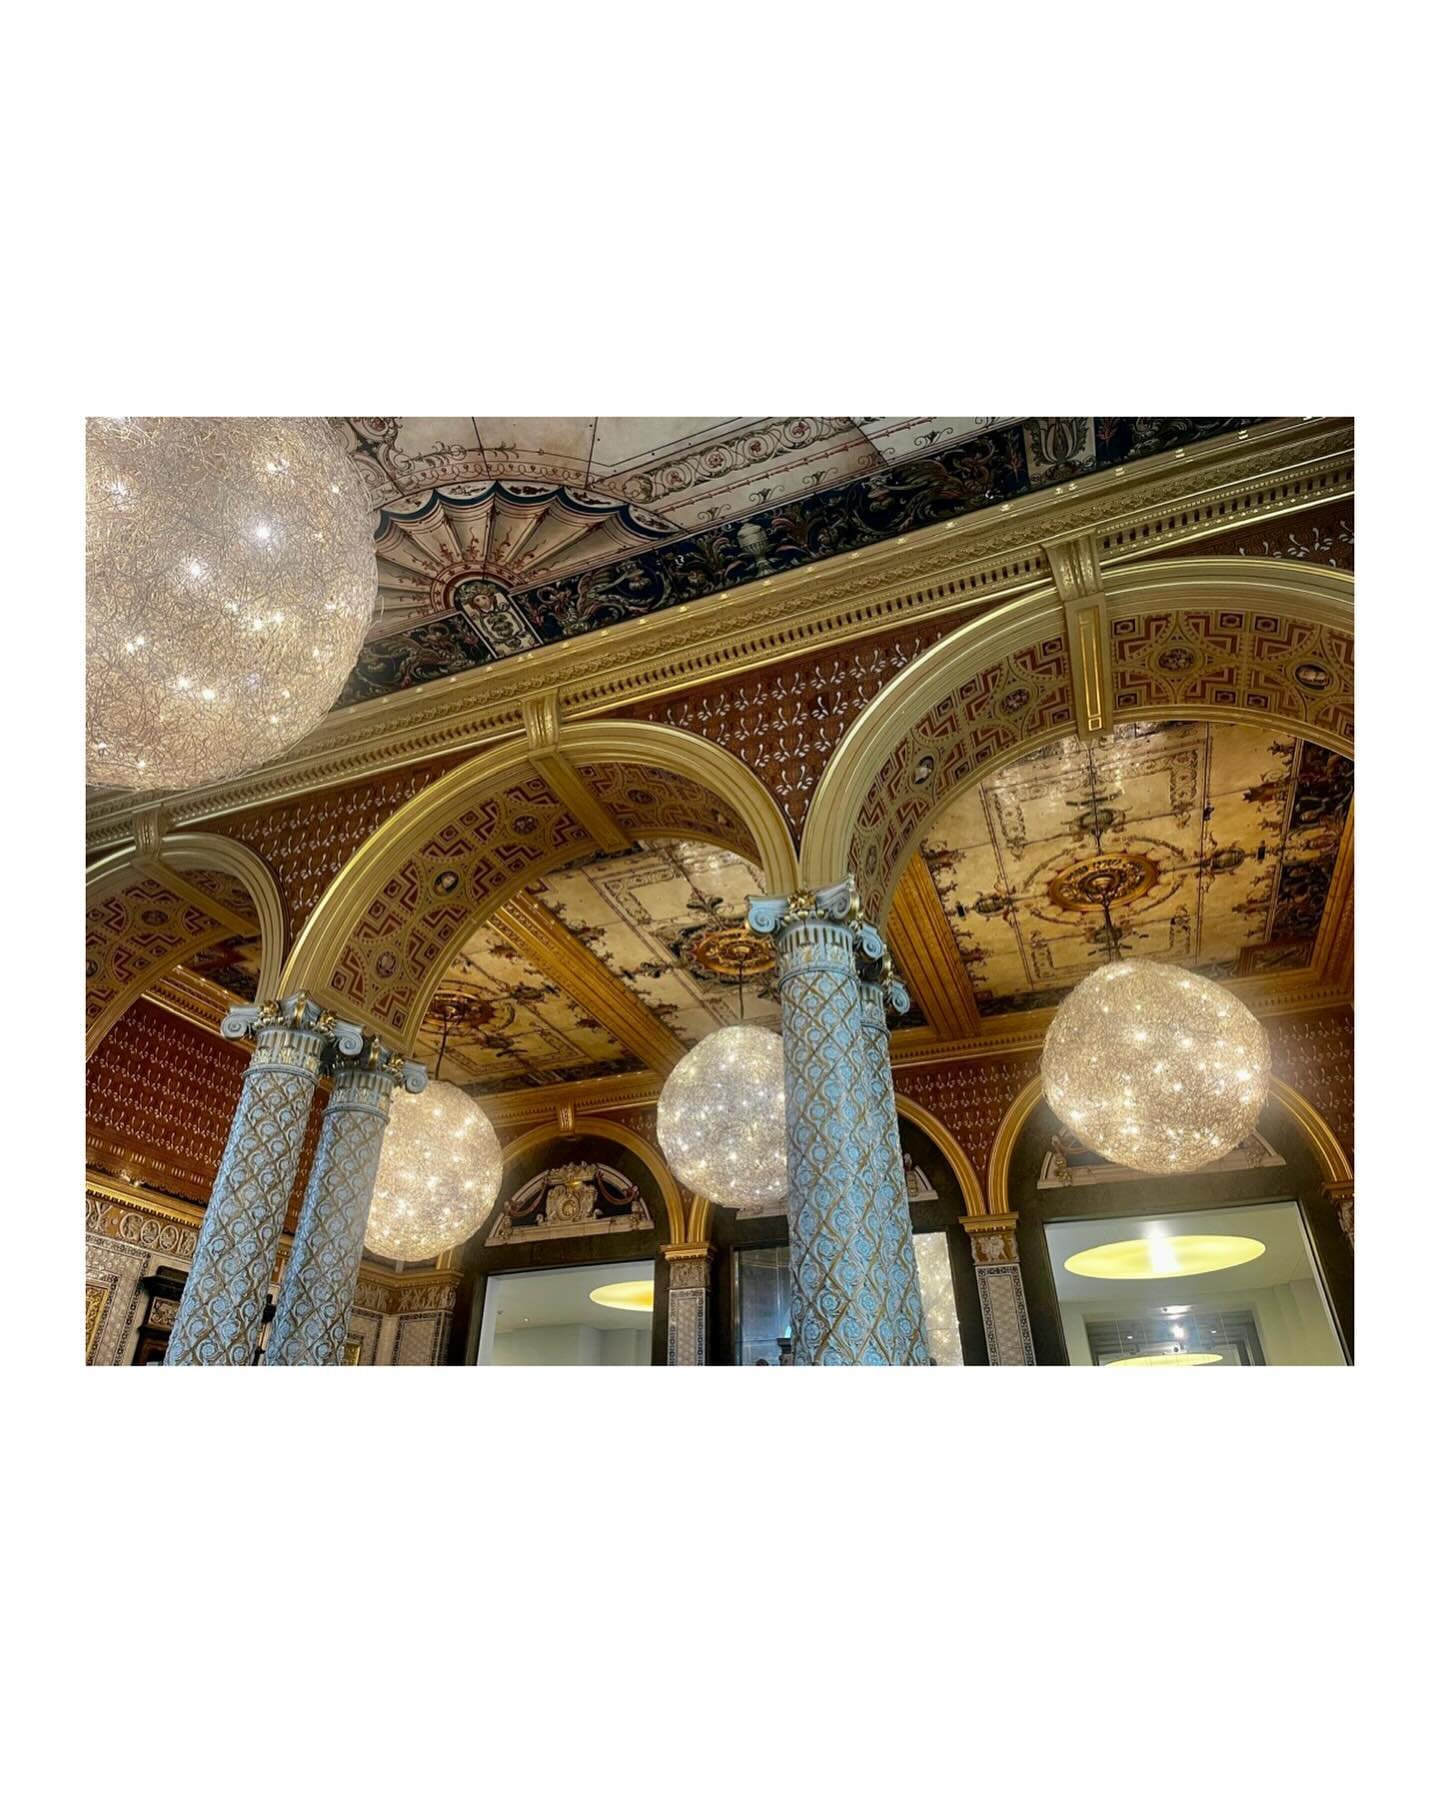 Stopped for a quick coffee break at the V&amp;A Museum cafe today and couldn&rsquo;t help take more photos of the stunning interior. Sometimes as designers it&rsquo;s good to remind ourselves that although we need to produce practical and functional 